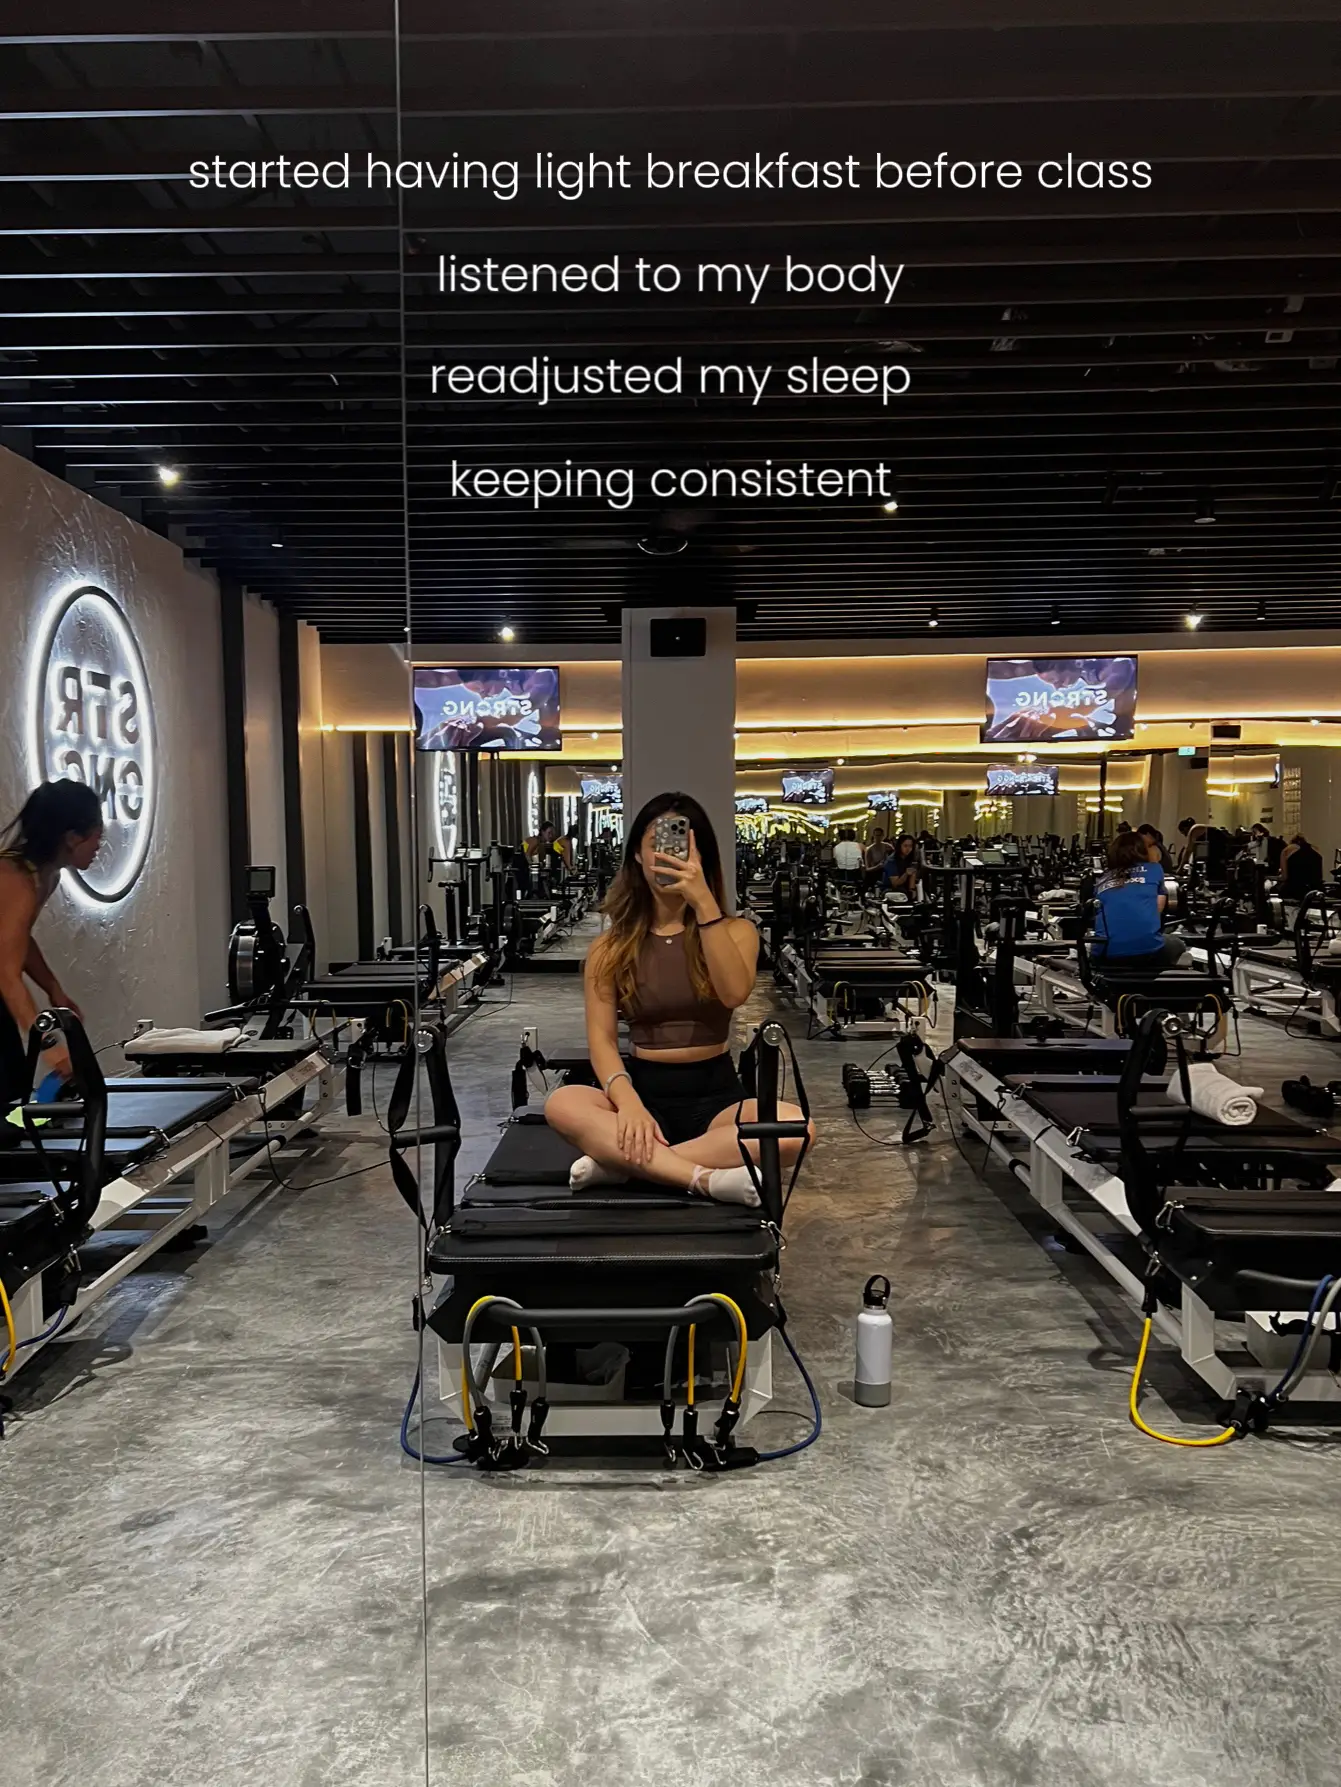 Class in review: KX Pilates is the toning full body workout that